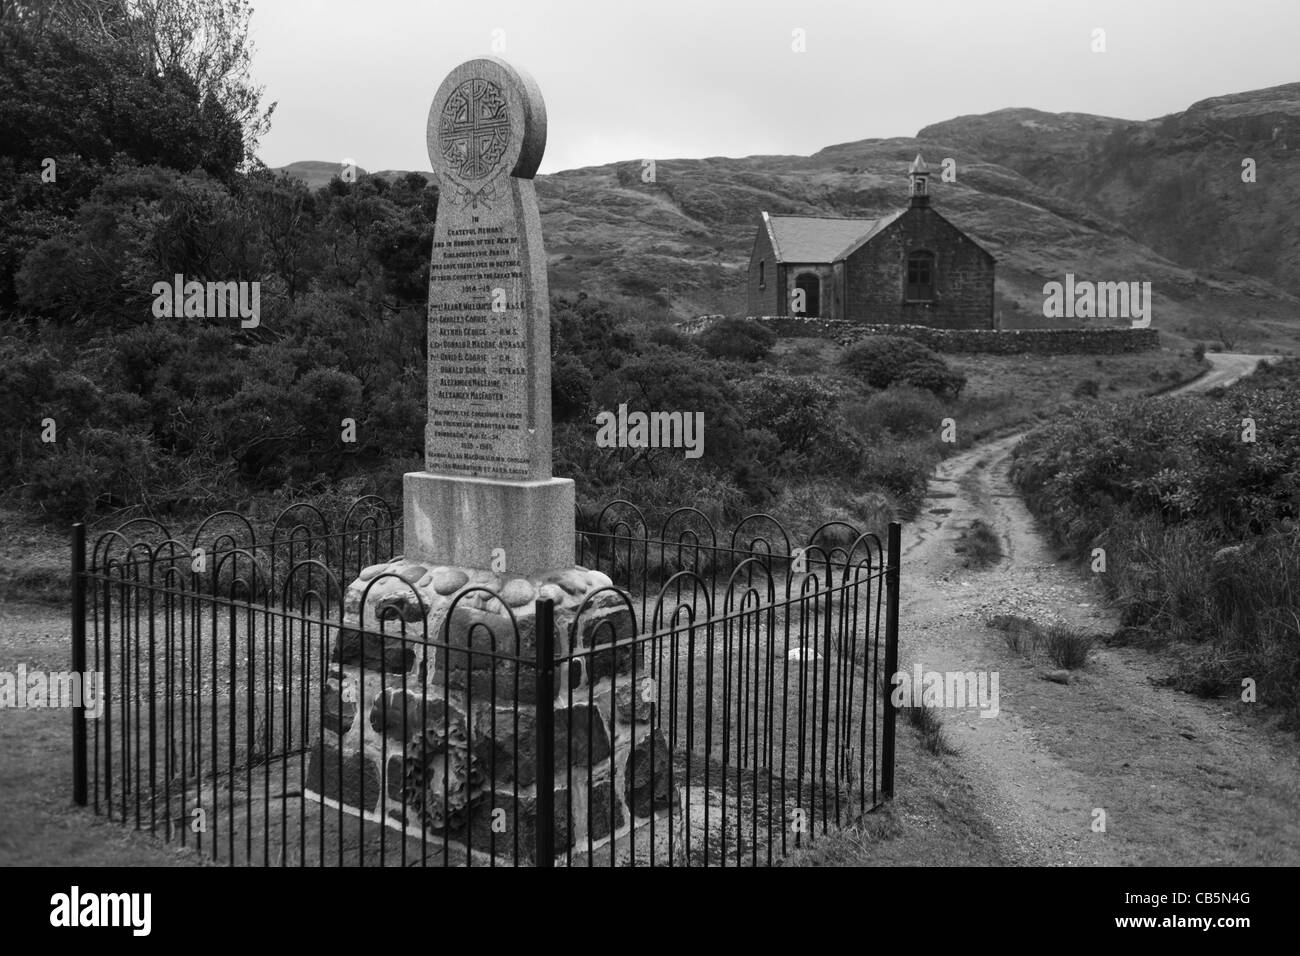 First world war memorial to those killed in the parish of Kinlochspelve, Isle of Mull, Scotland. Stock Photo